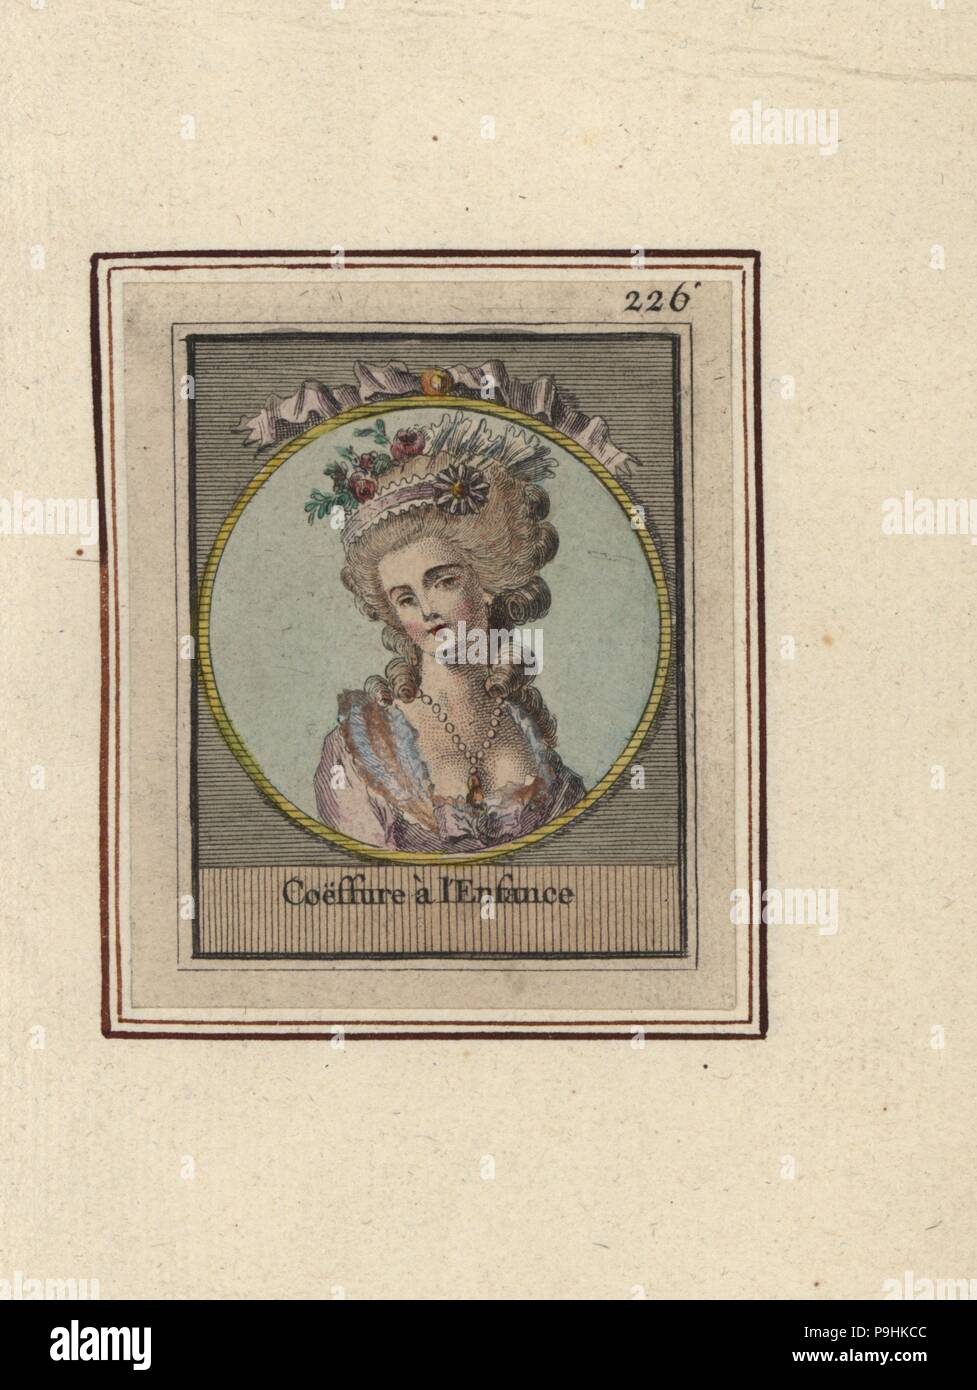 Woman in hairstyle decorated with ribbons and flowers called Childhood. Coeffure a l'Engance. Handcoloured copperplate engraving by an unknown artist from an Album of Fashionable Hairstyles of 1783, Suite des Coeffures a la Mode en 1783, Esnauts et Rapilly, Paris, 1783. Stock Photo